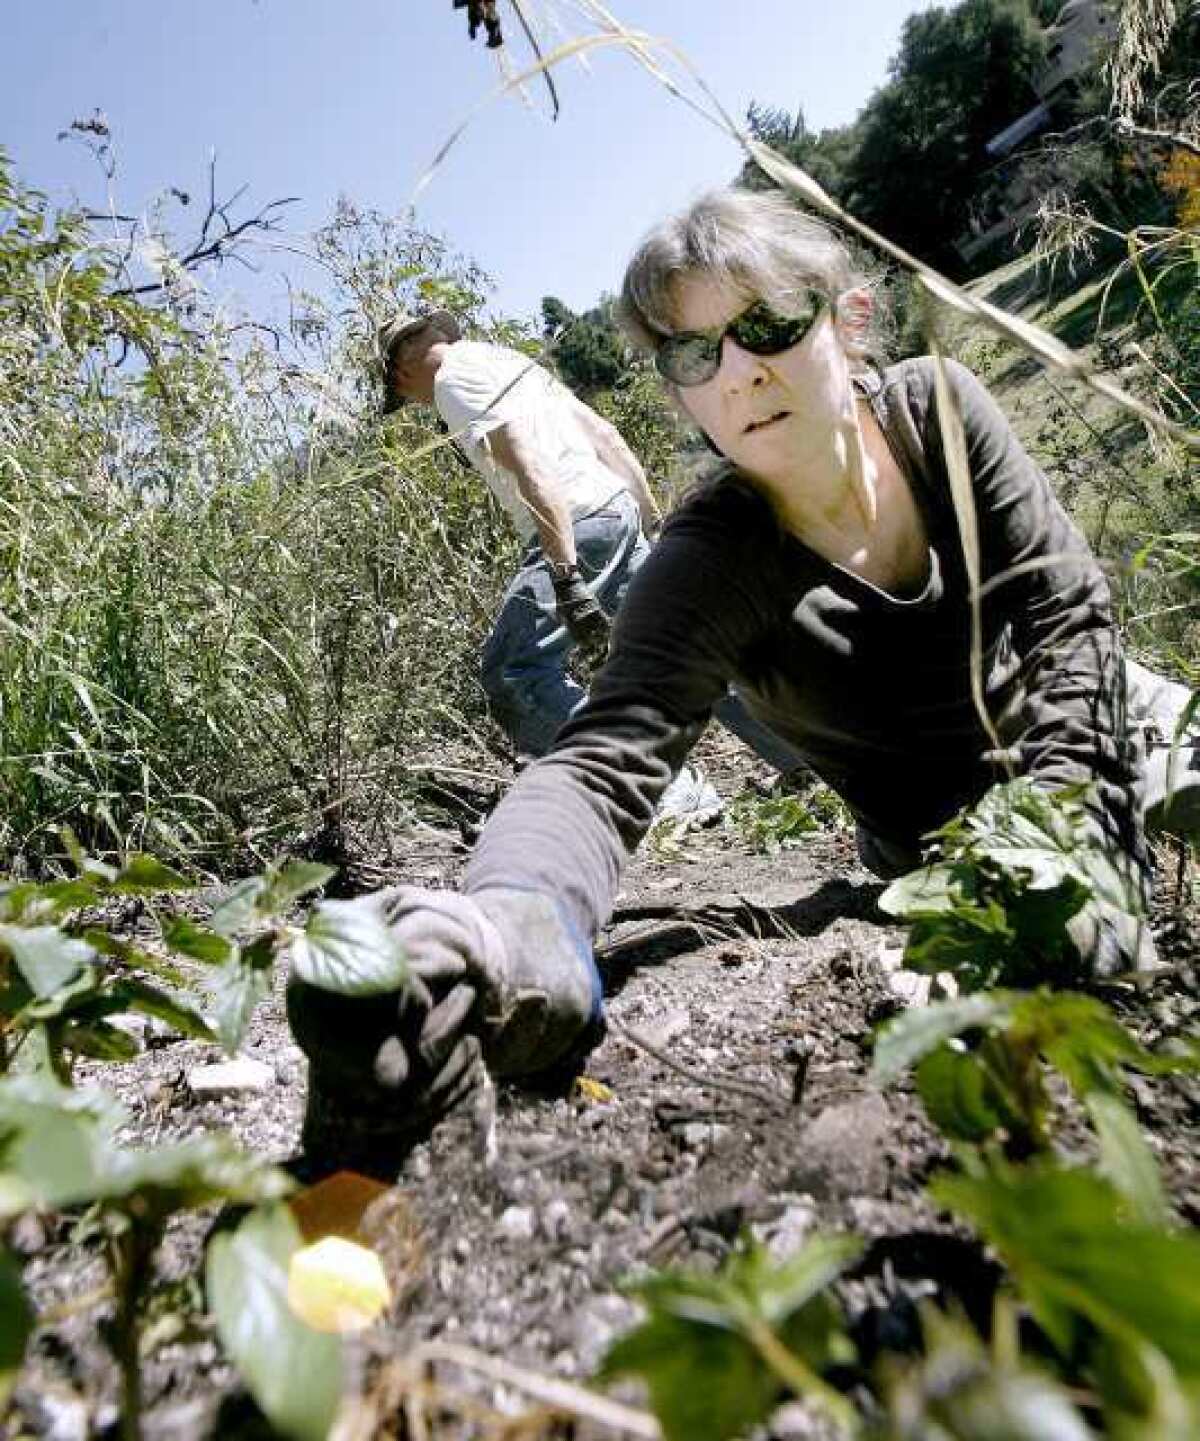 Althea Edwards of La Crescenta helps remove invasive non-native Castor bean plants on a hillside at the Rosemont Preserve during volunteer clean up day at the La Crescenta open space. About 15 volunteers came out to help remove invasive plants.